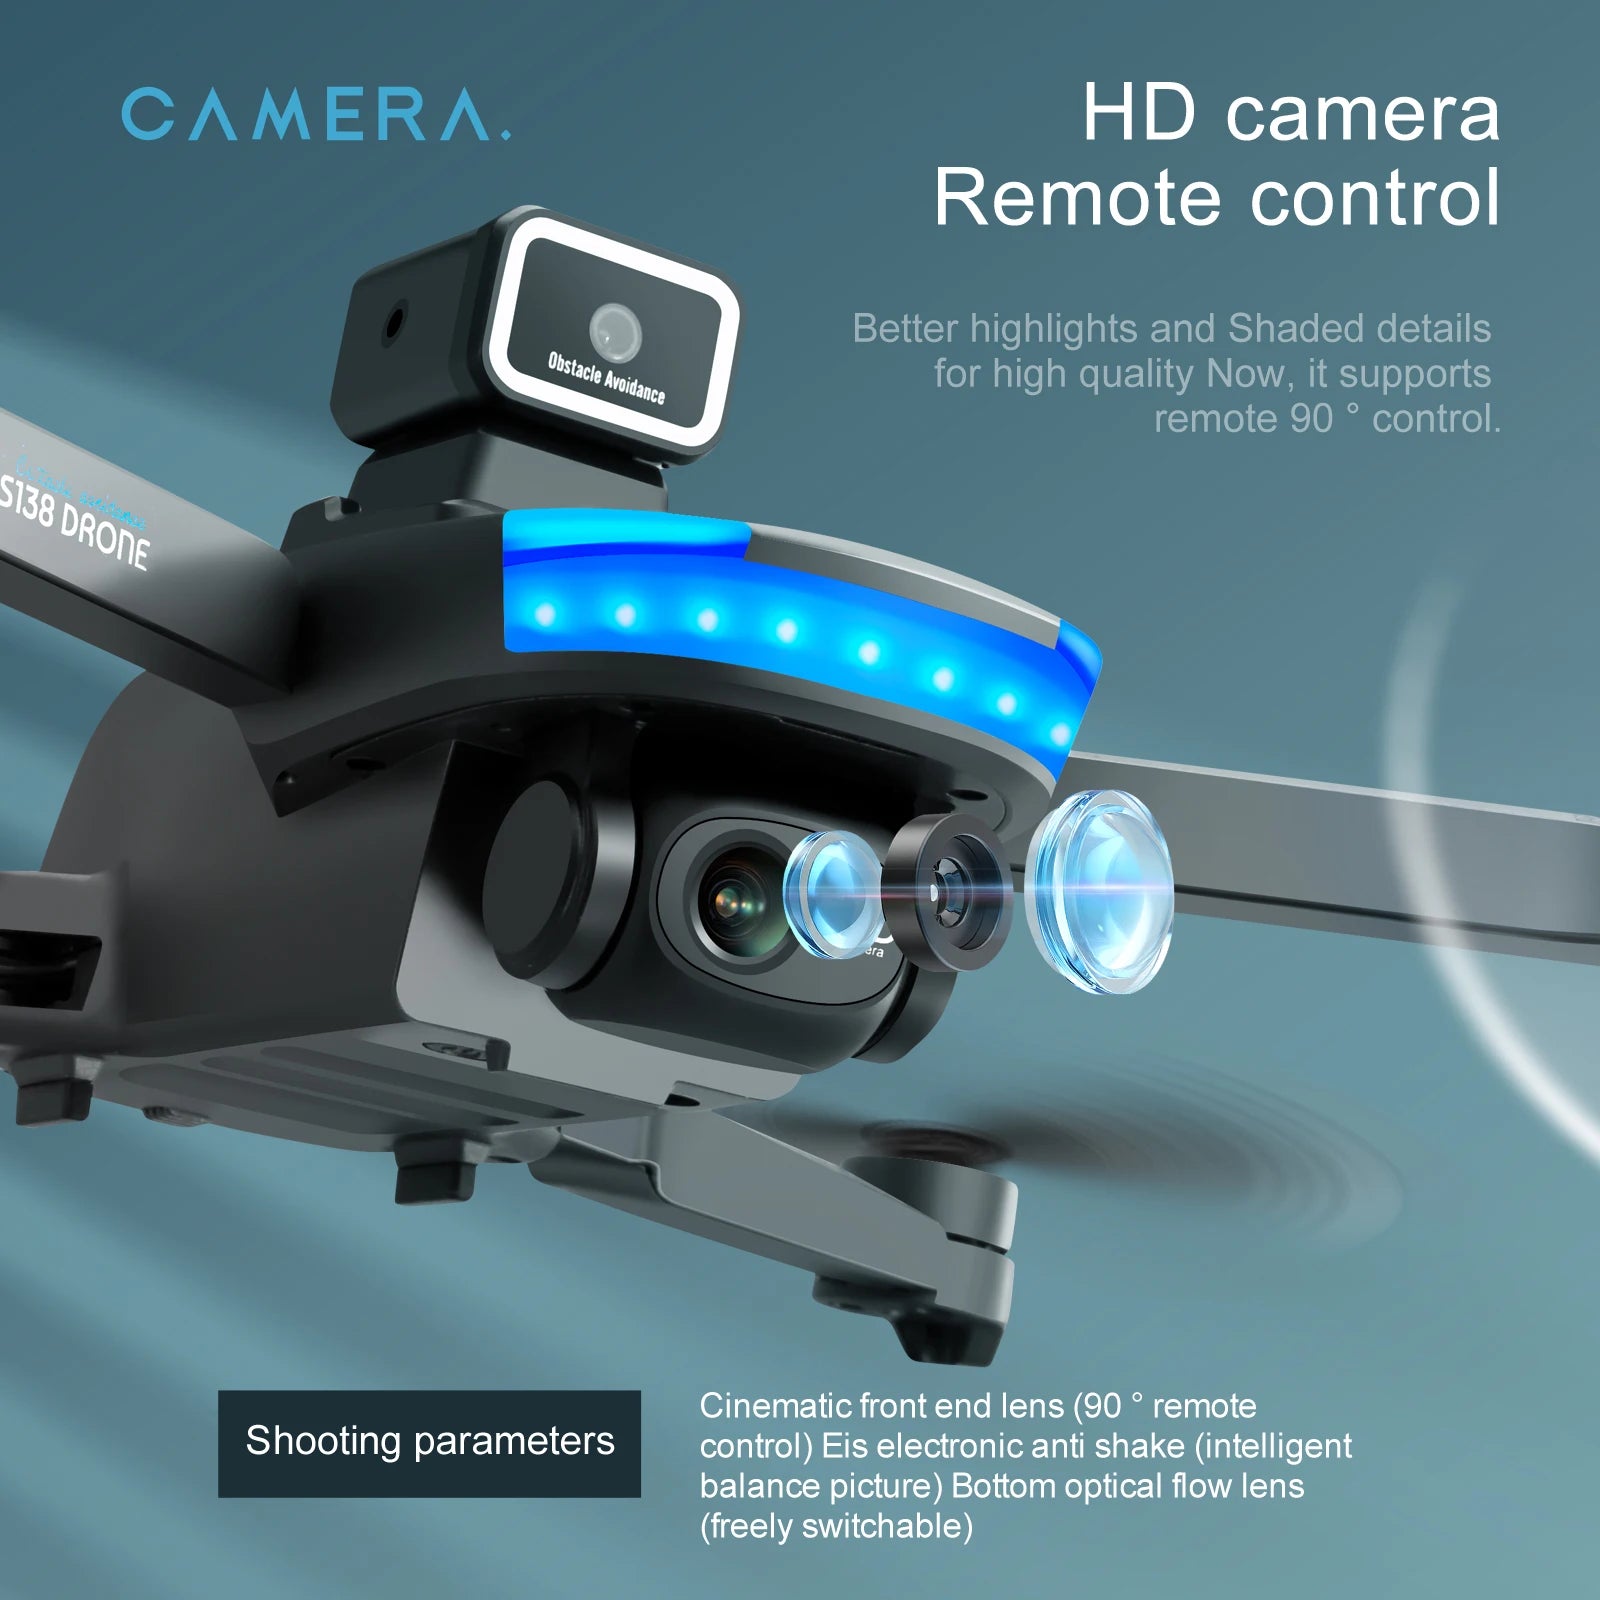 S138 Drone, hd camera remote control better highlights and shaded details for high